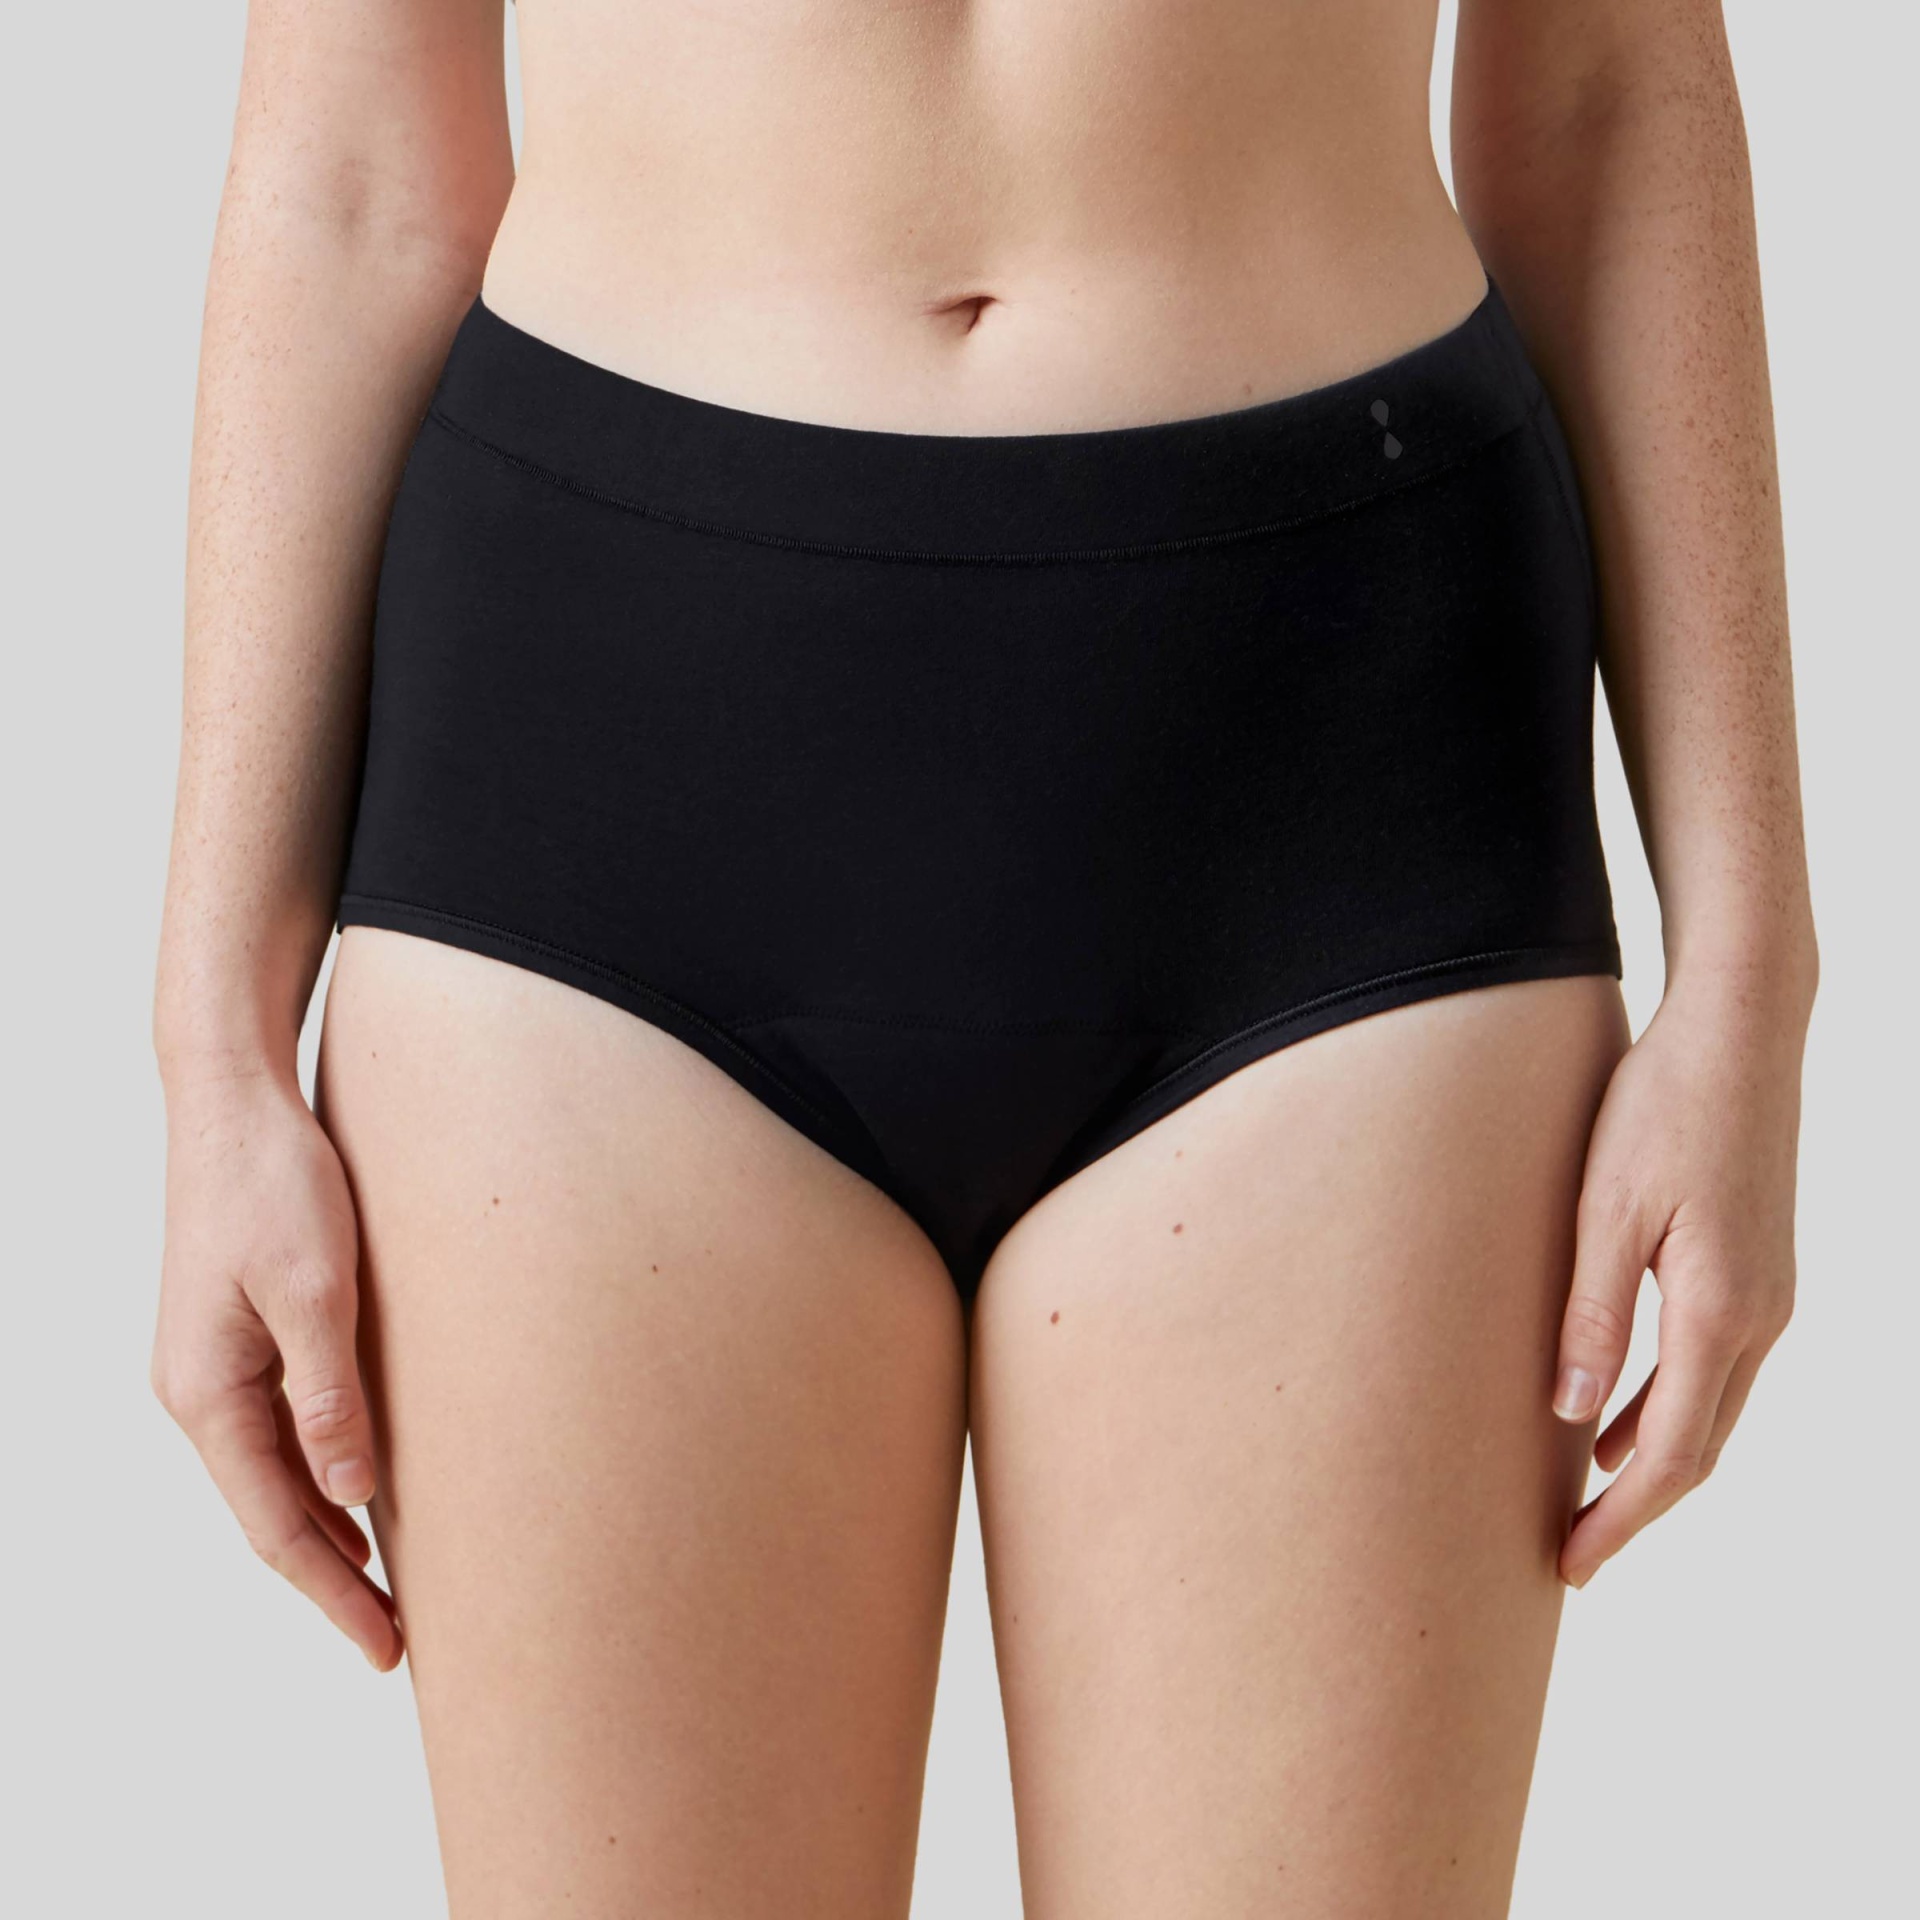 Thinx For All Moderate Absorbency Brief Period Underwear